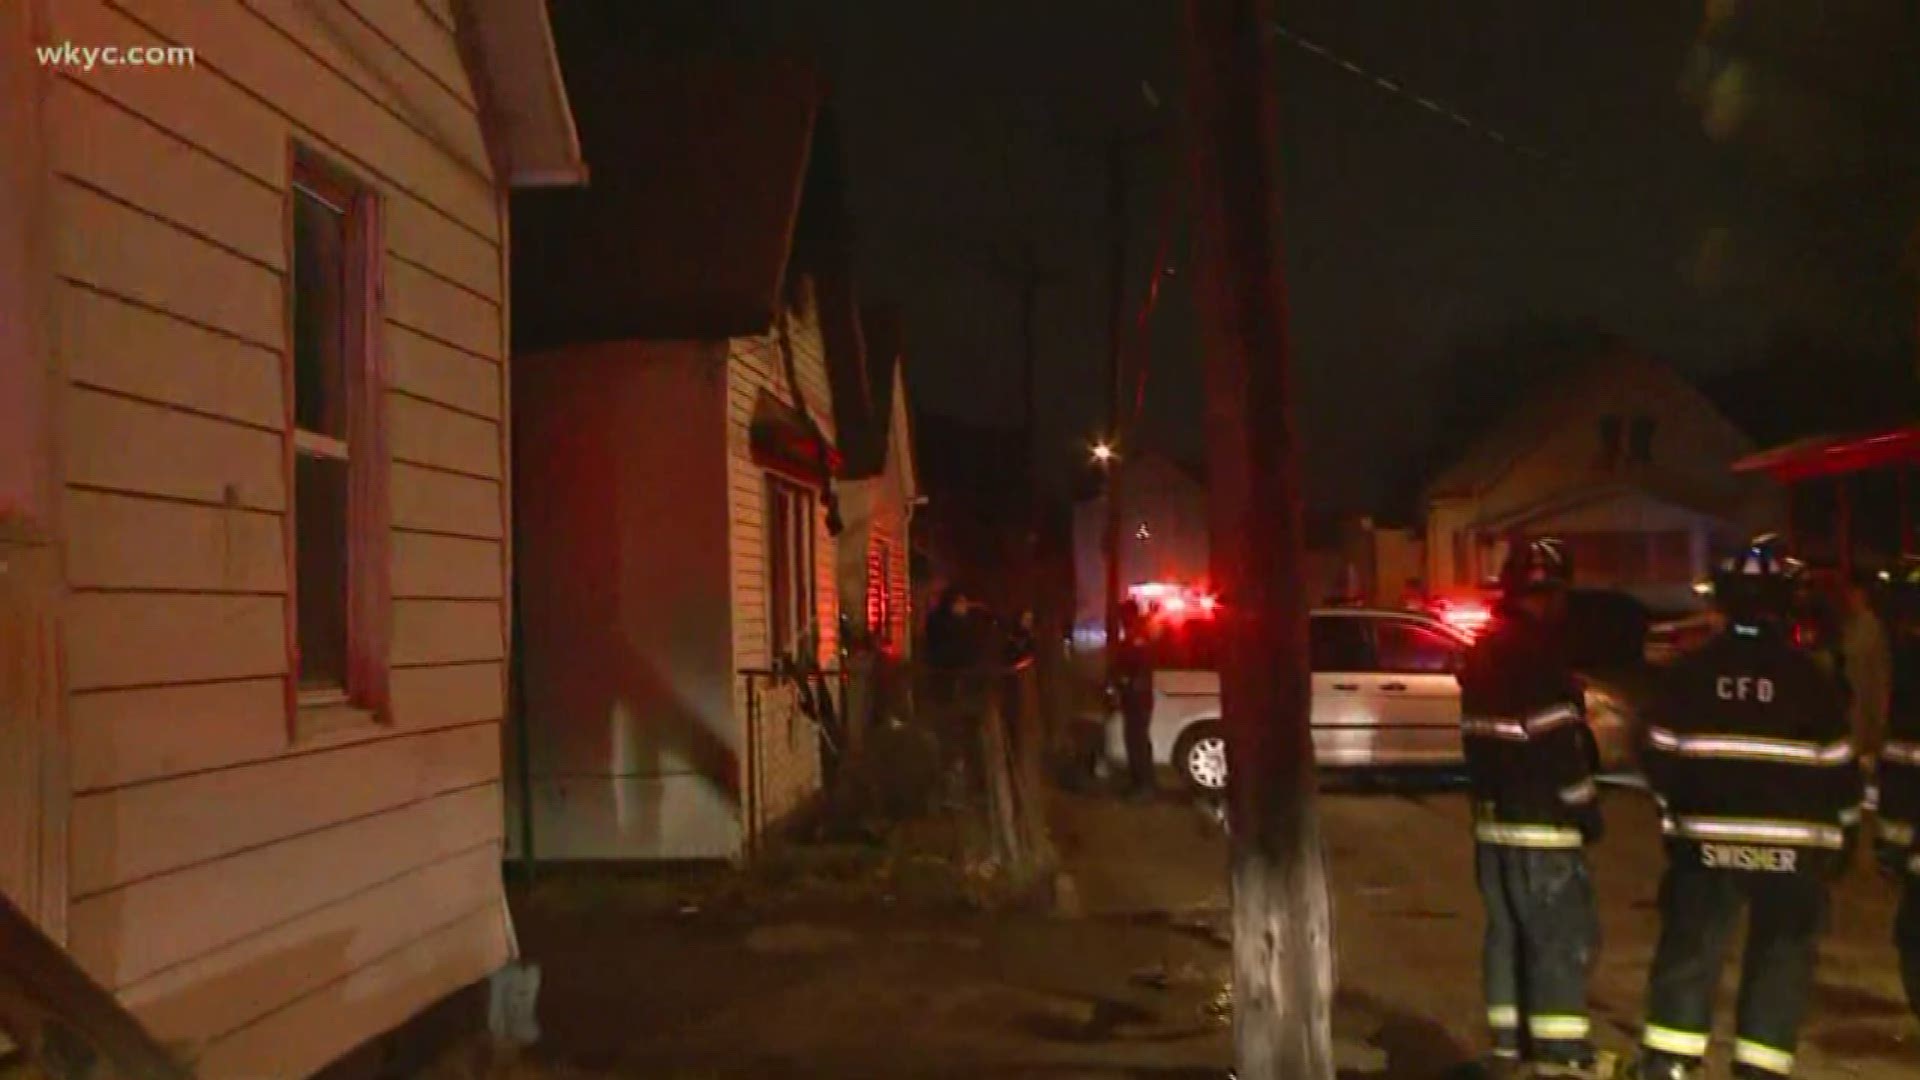 Cleveland Fire responded to the scene on W. 47th Street around 5 a.m. Eight others - four adults and four children were also rescued.